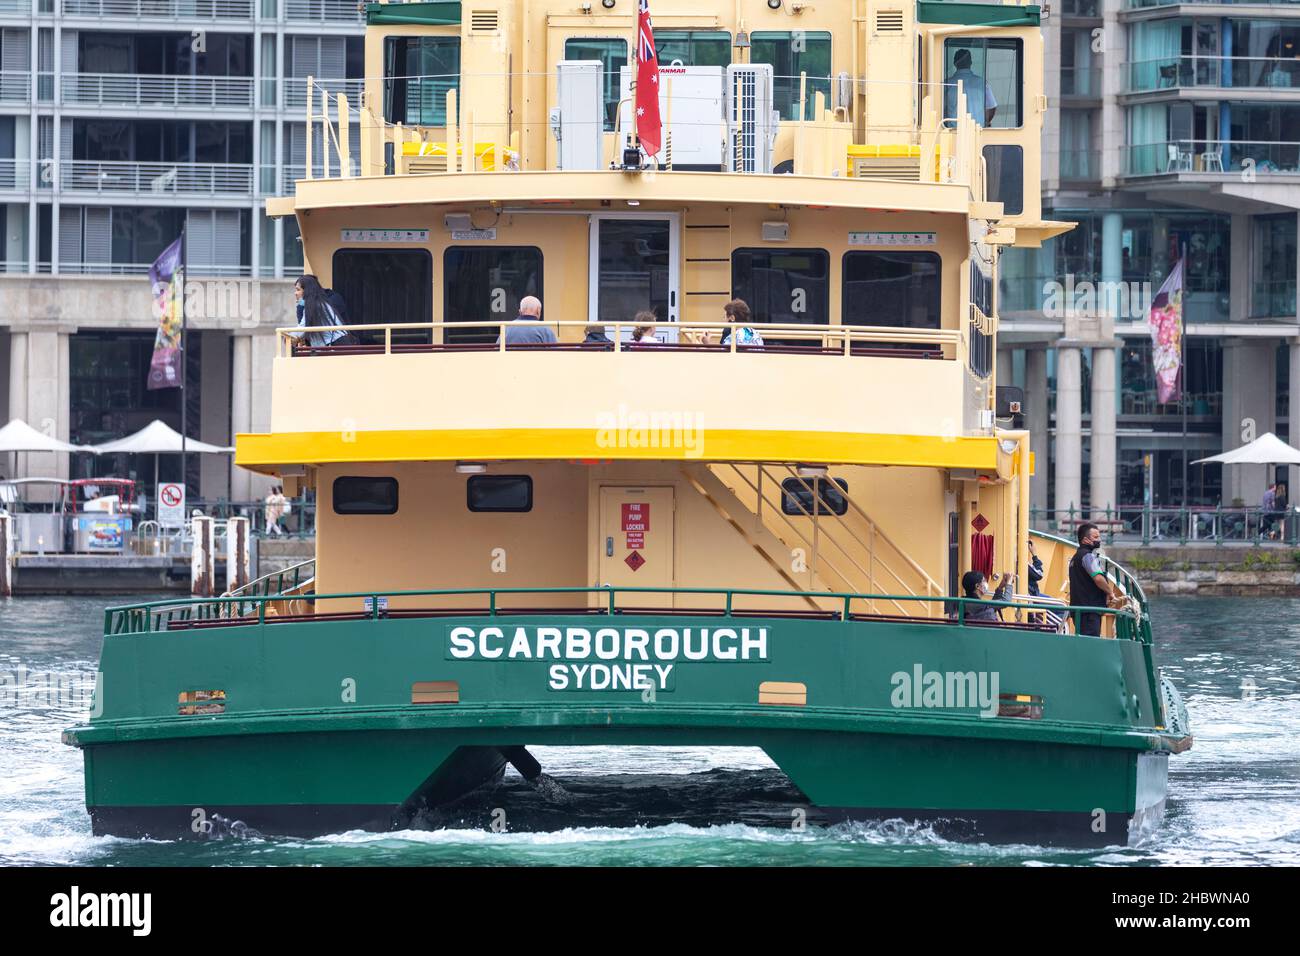 Iconic Sydney ferry the MV Scarborough, near East circular Quay as it departs with passenger son board, a first fleet class ferry,Sydney Stock Photo